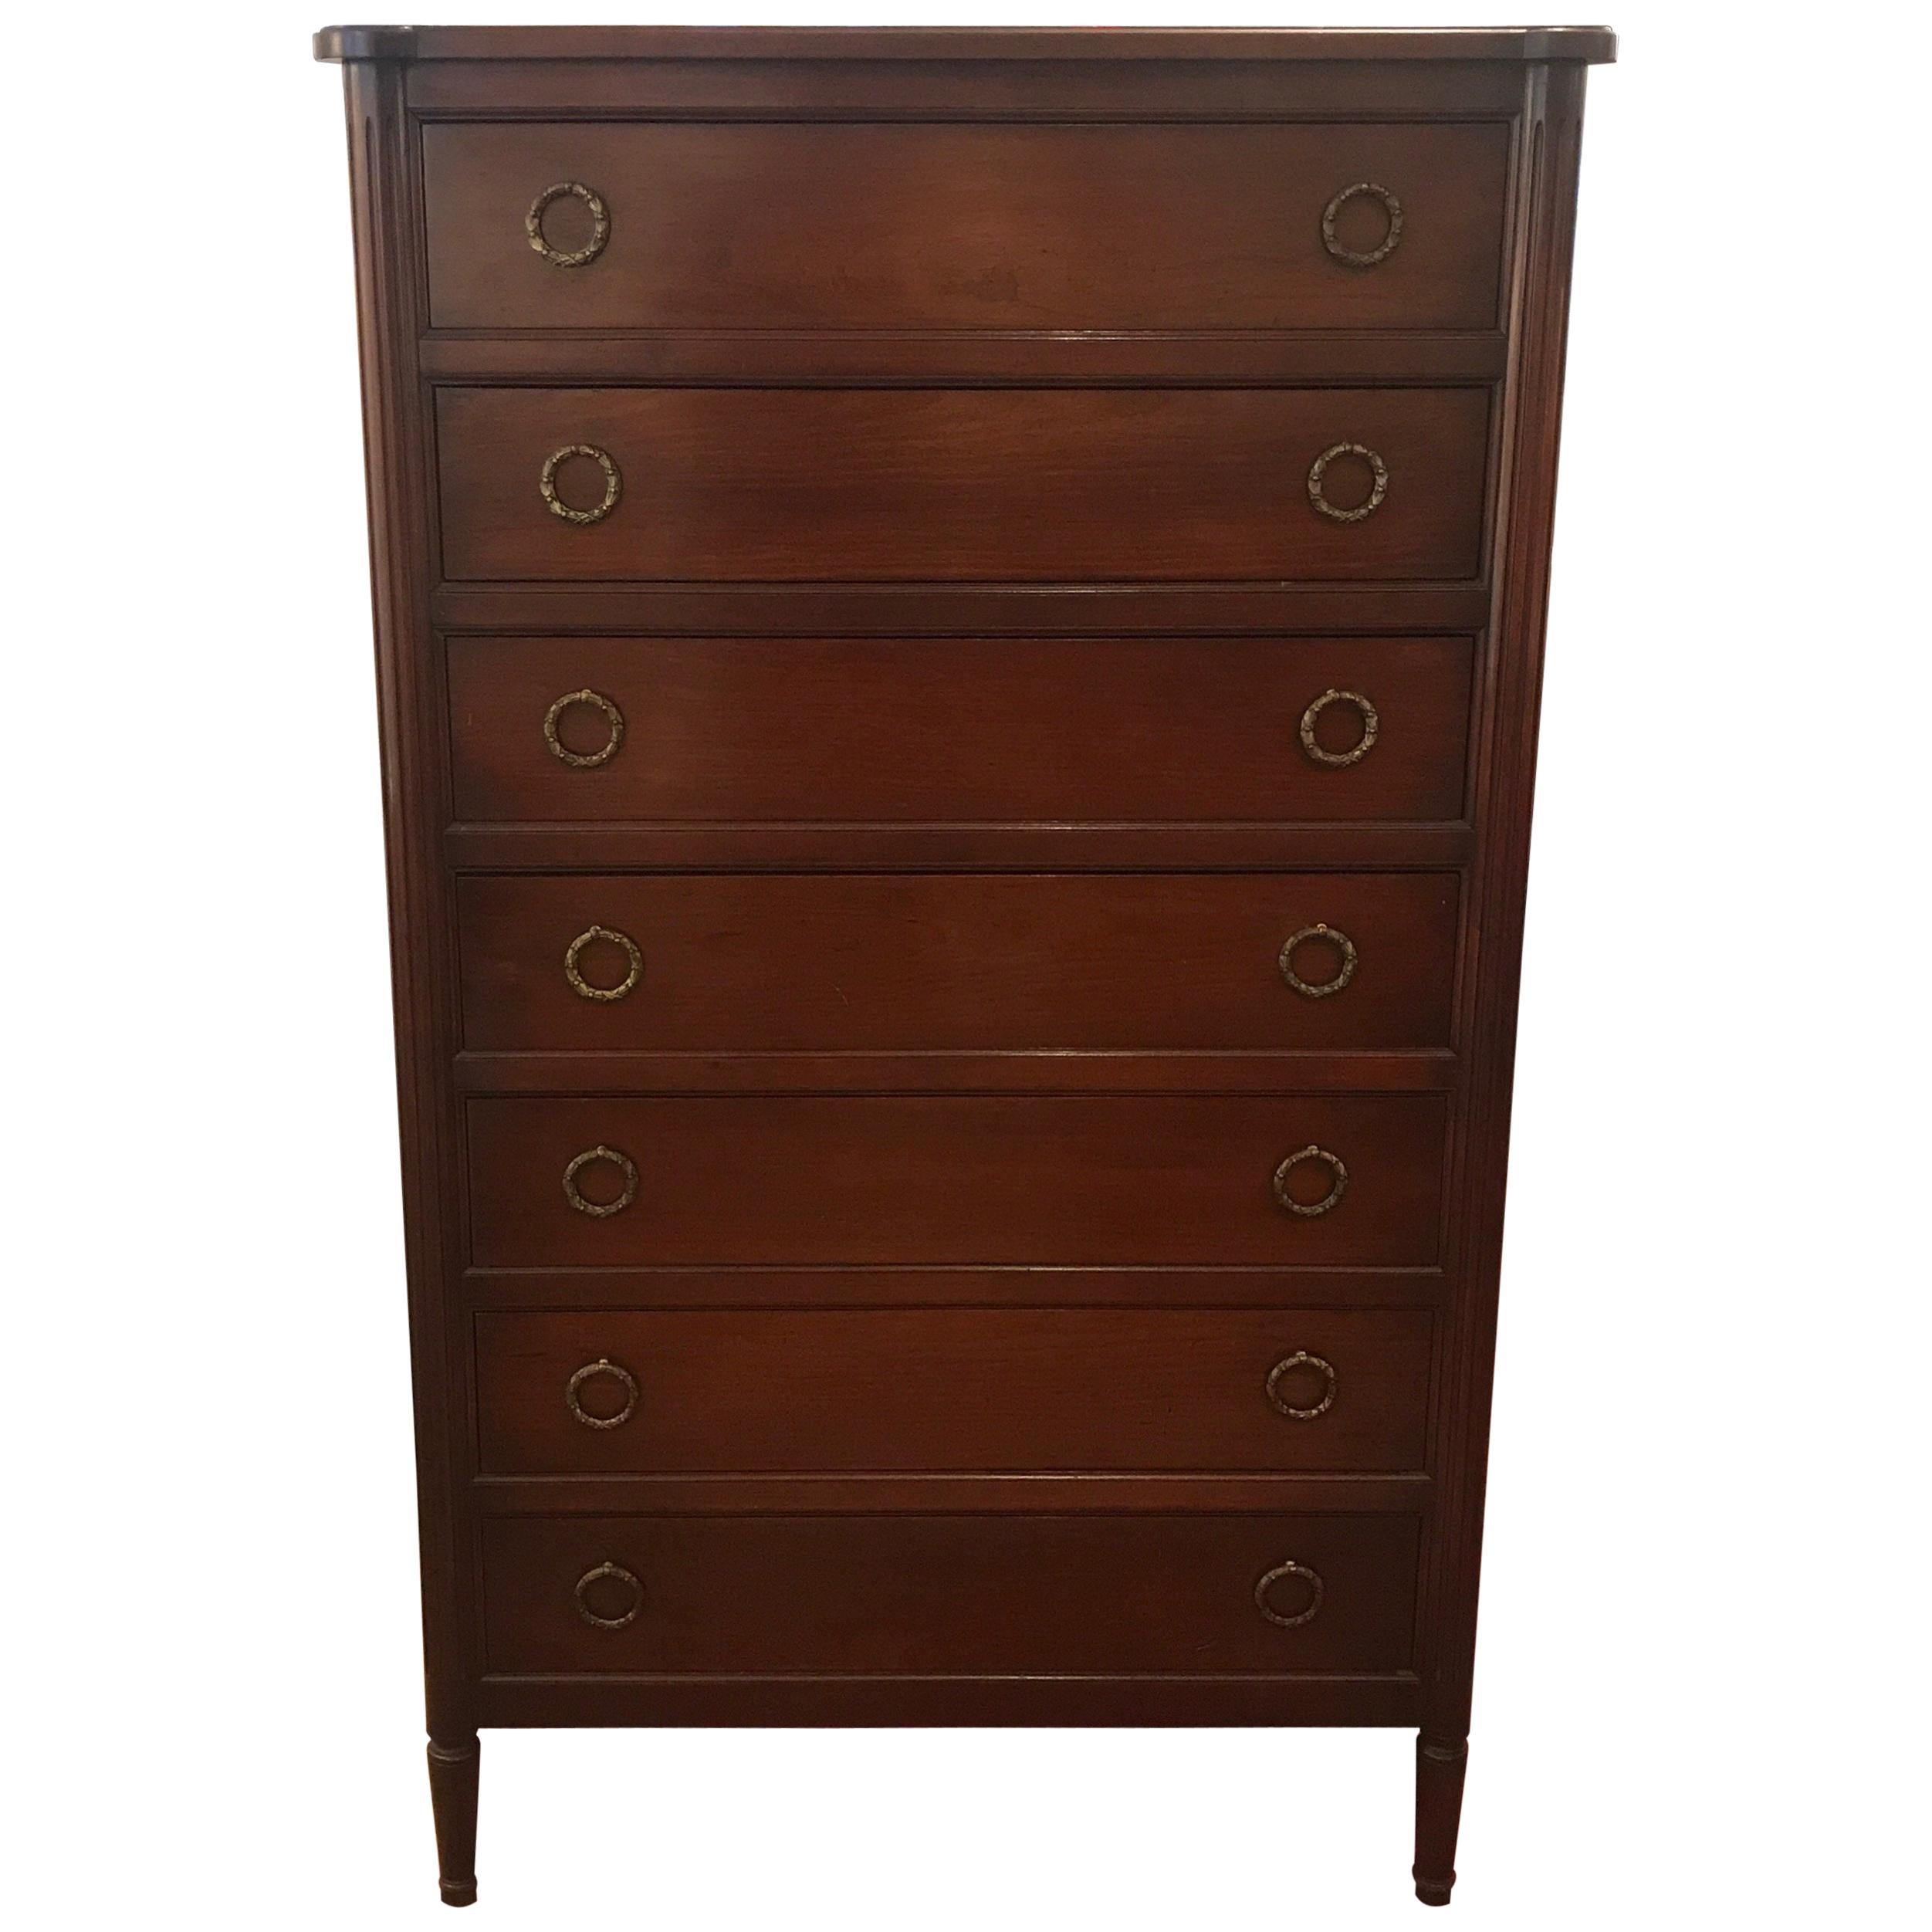 Louis XVI Style Walnut Tall Chest of Drawers